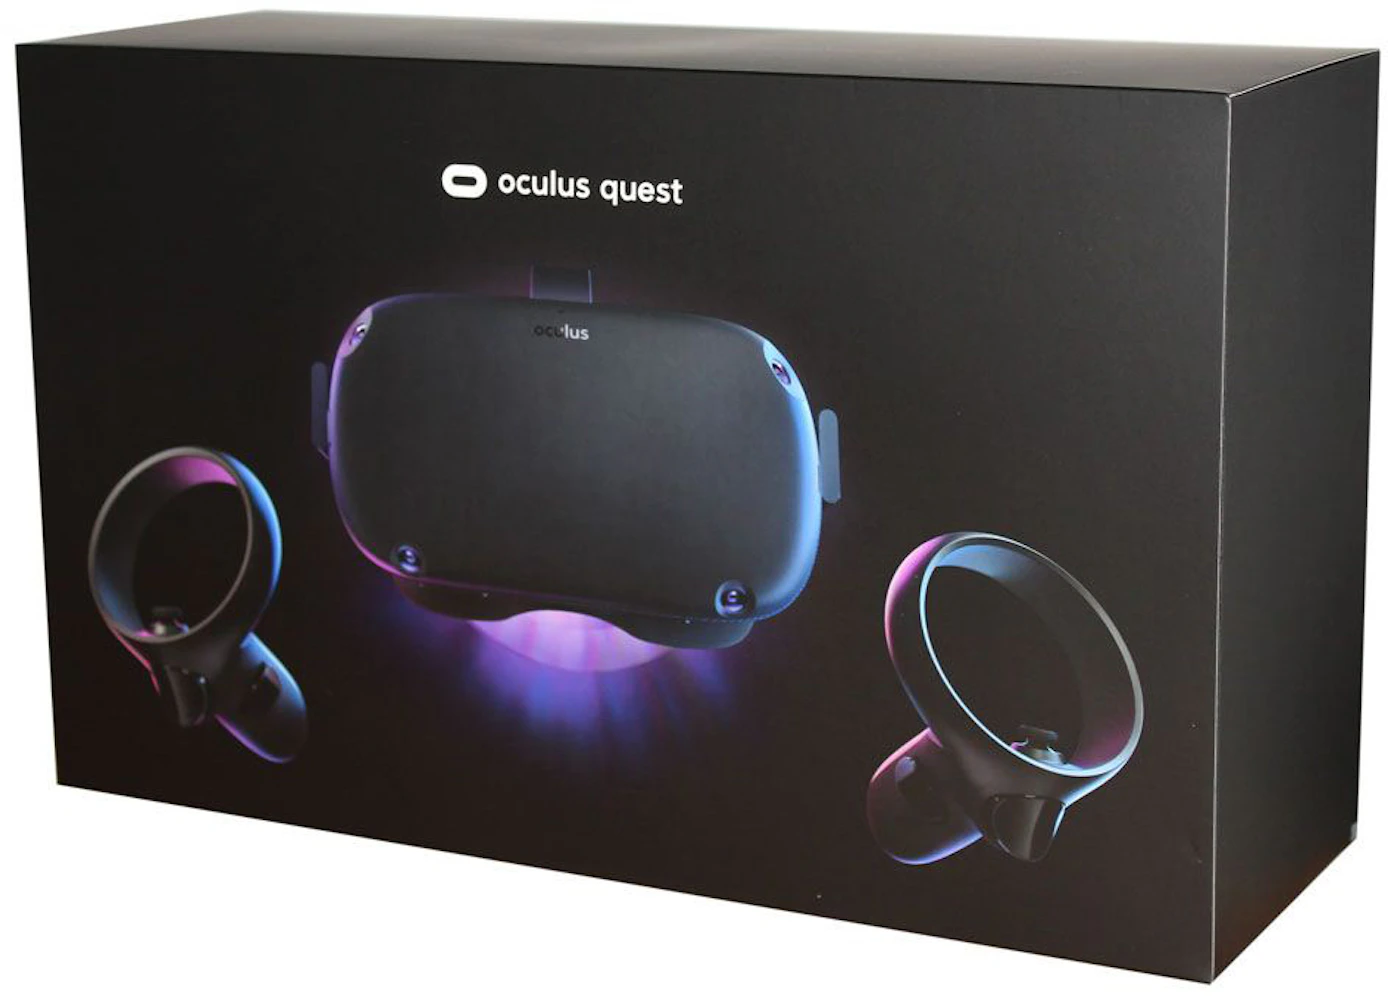 Meta (Oculus) Quest All-In-One VR Headset 128GB Black - US